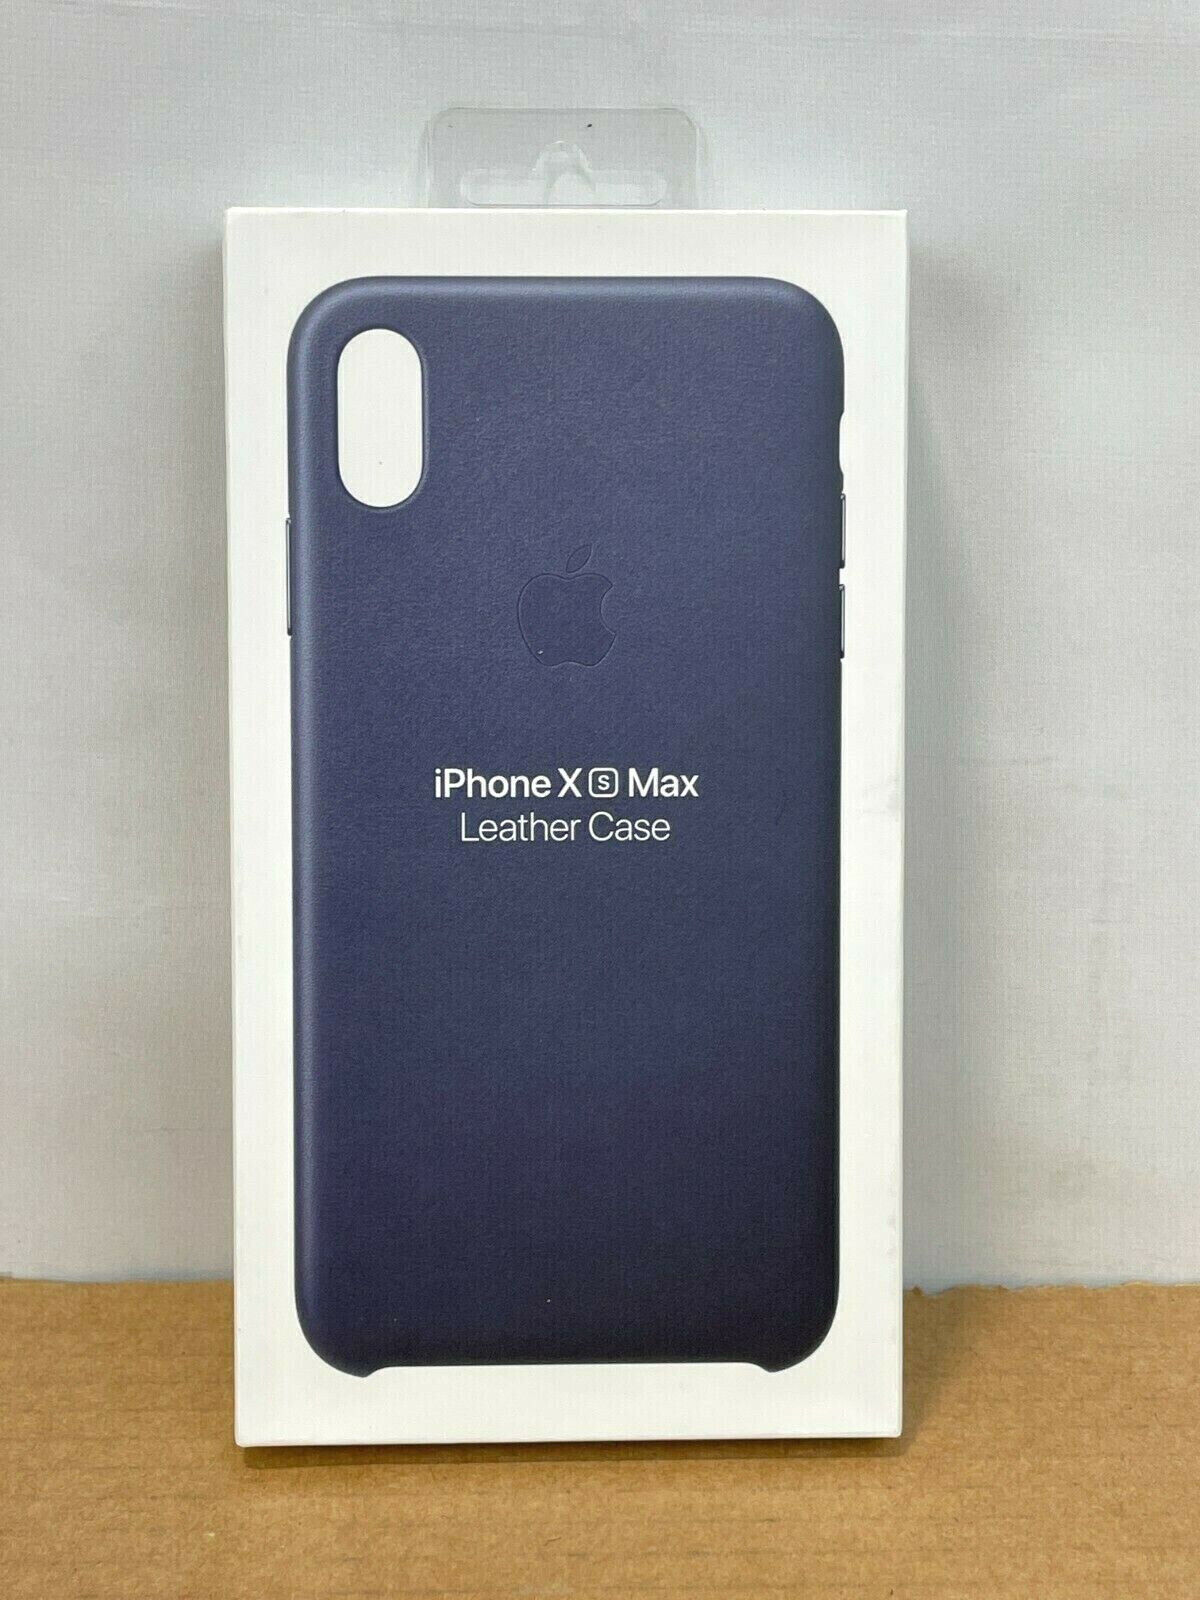 Primary image for BRAND NEW Apple iPhone Xs Max Midnight Blue Leather Case MRWU2ZM/A ❤️✅❤️️